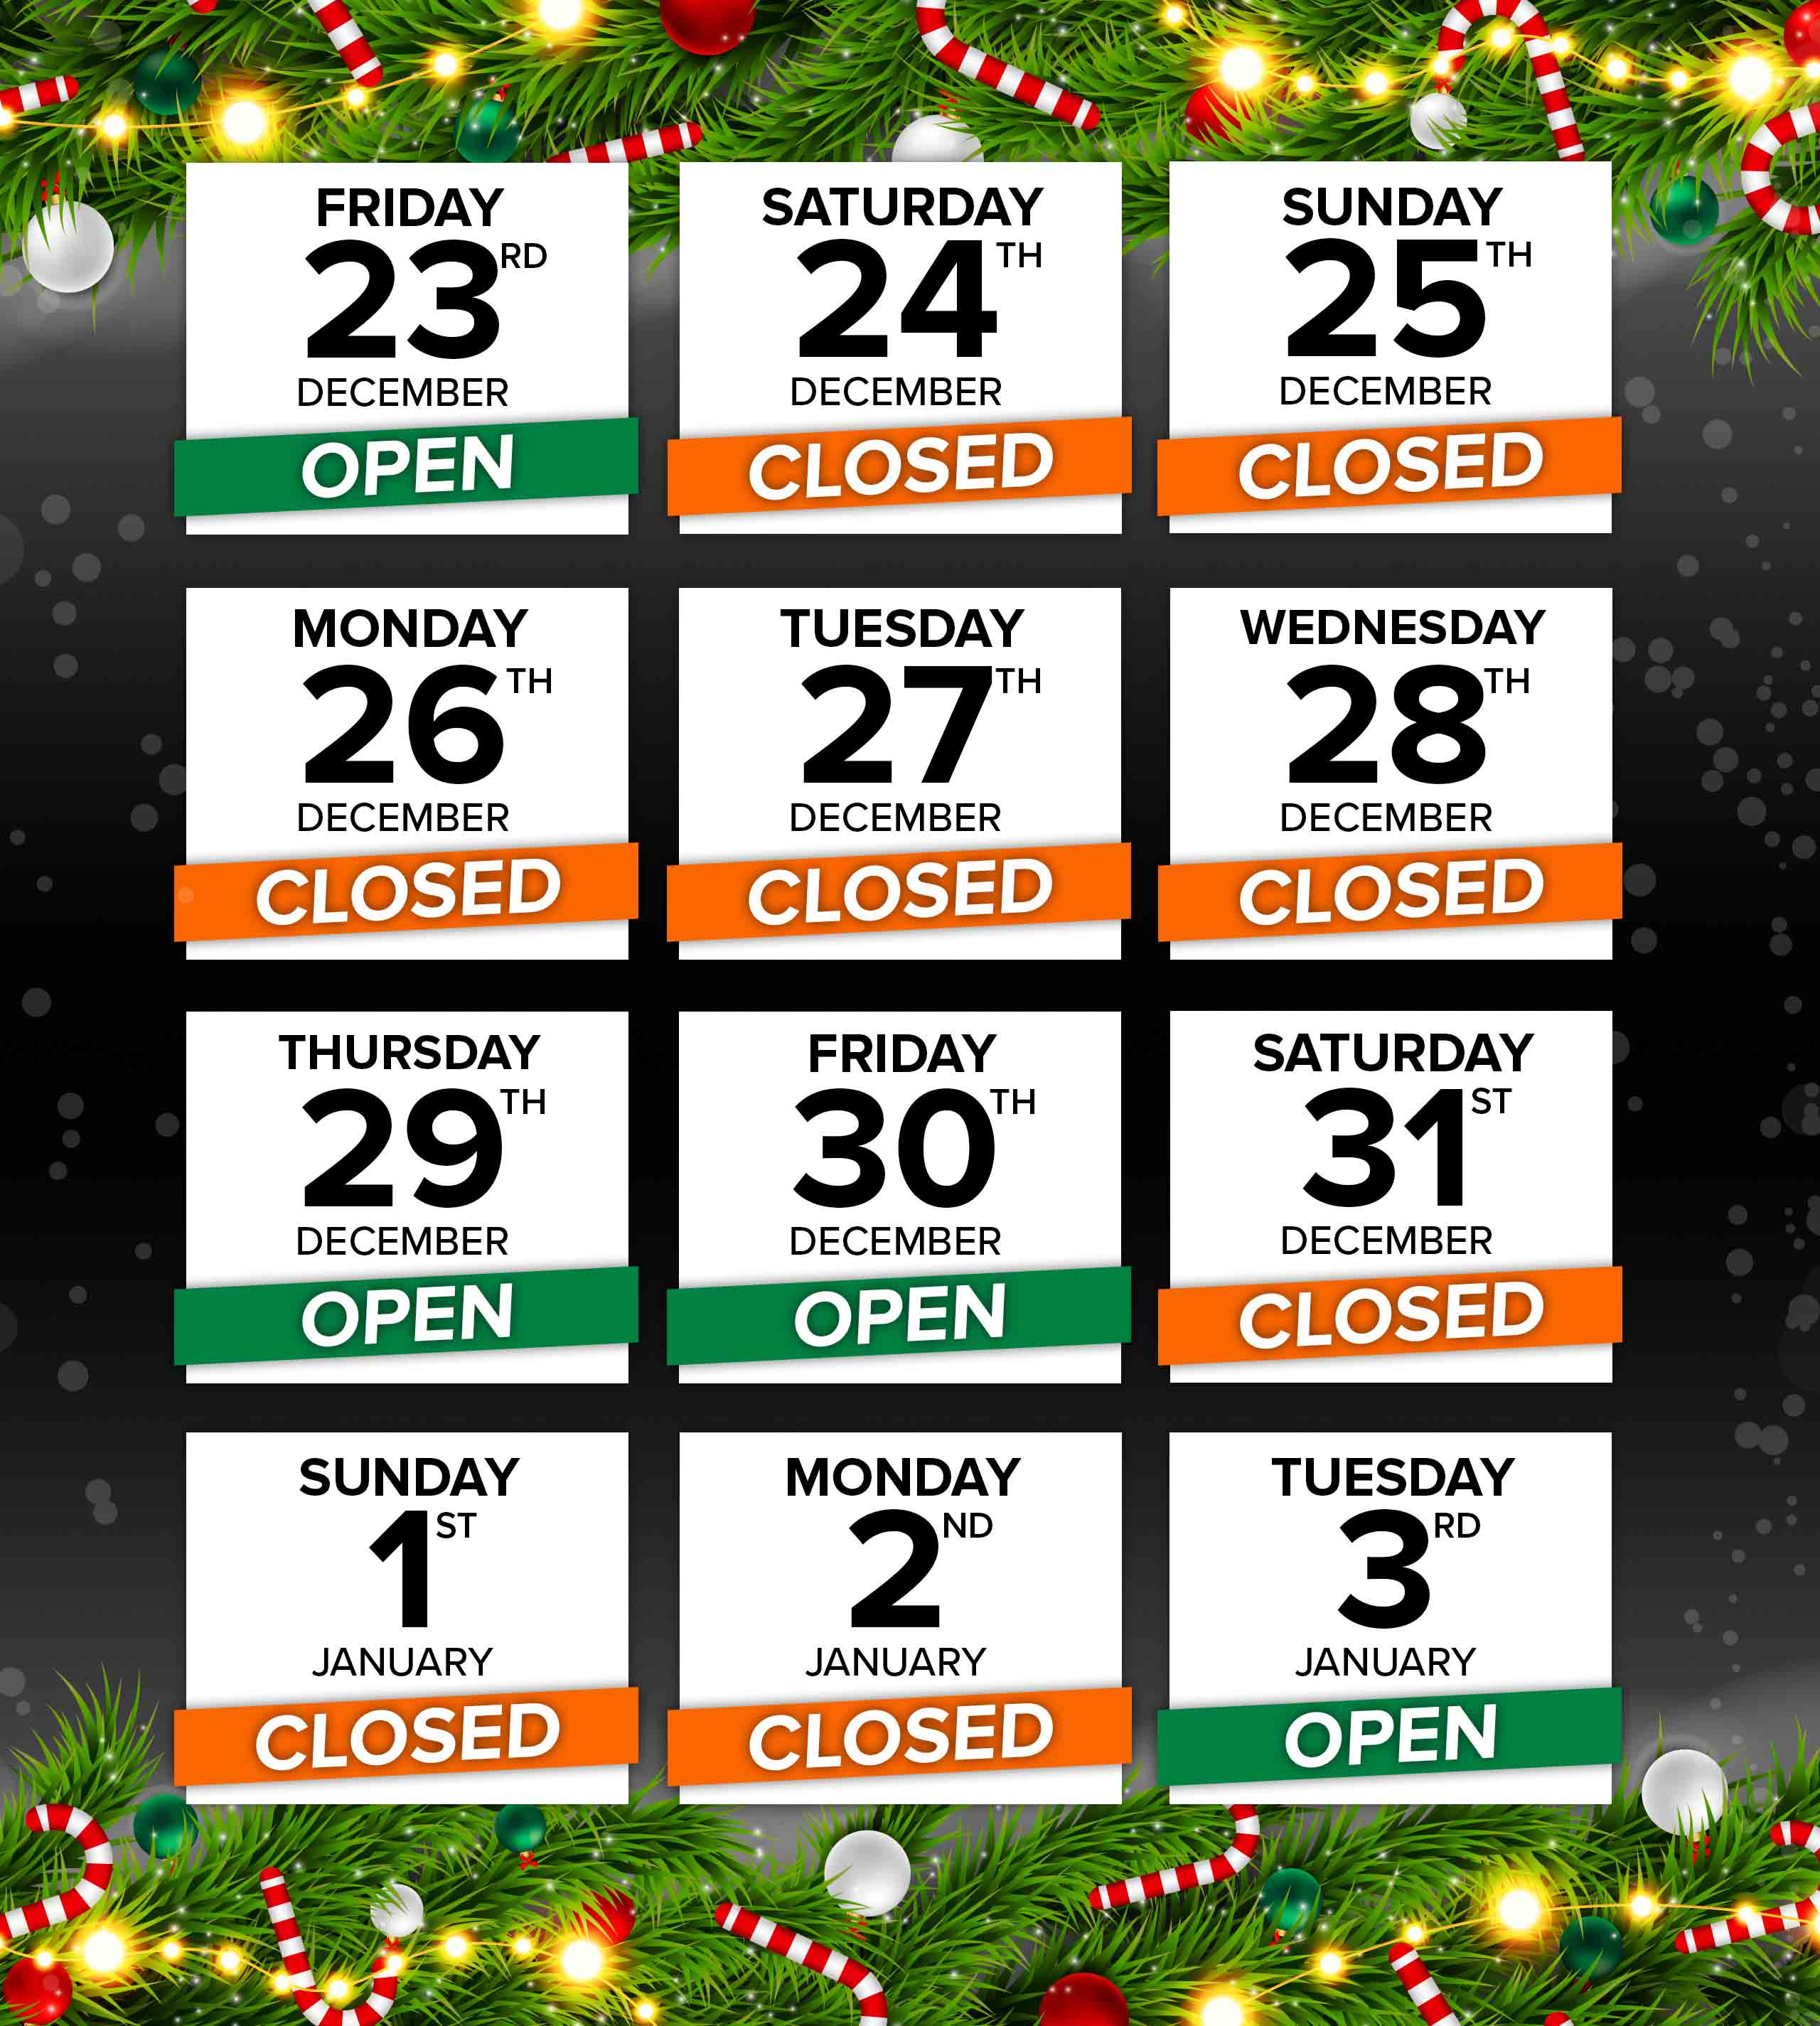 Christmas and new year opening hours for Maidstone Harley-Davidson® and all Laguna stores, 2022 - 2-23.